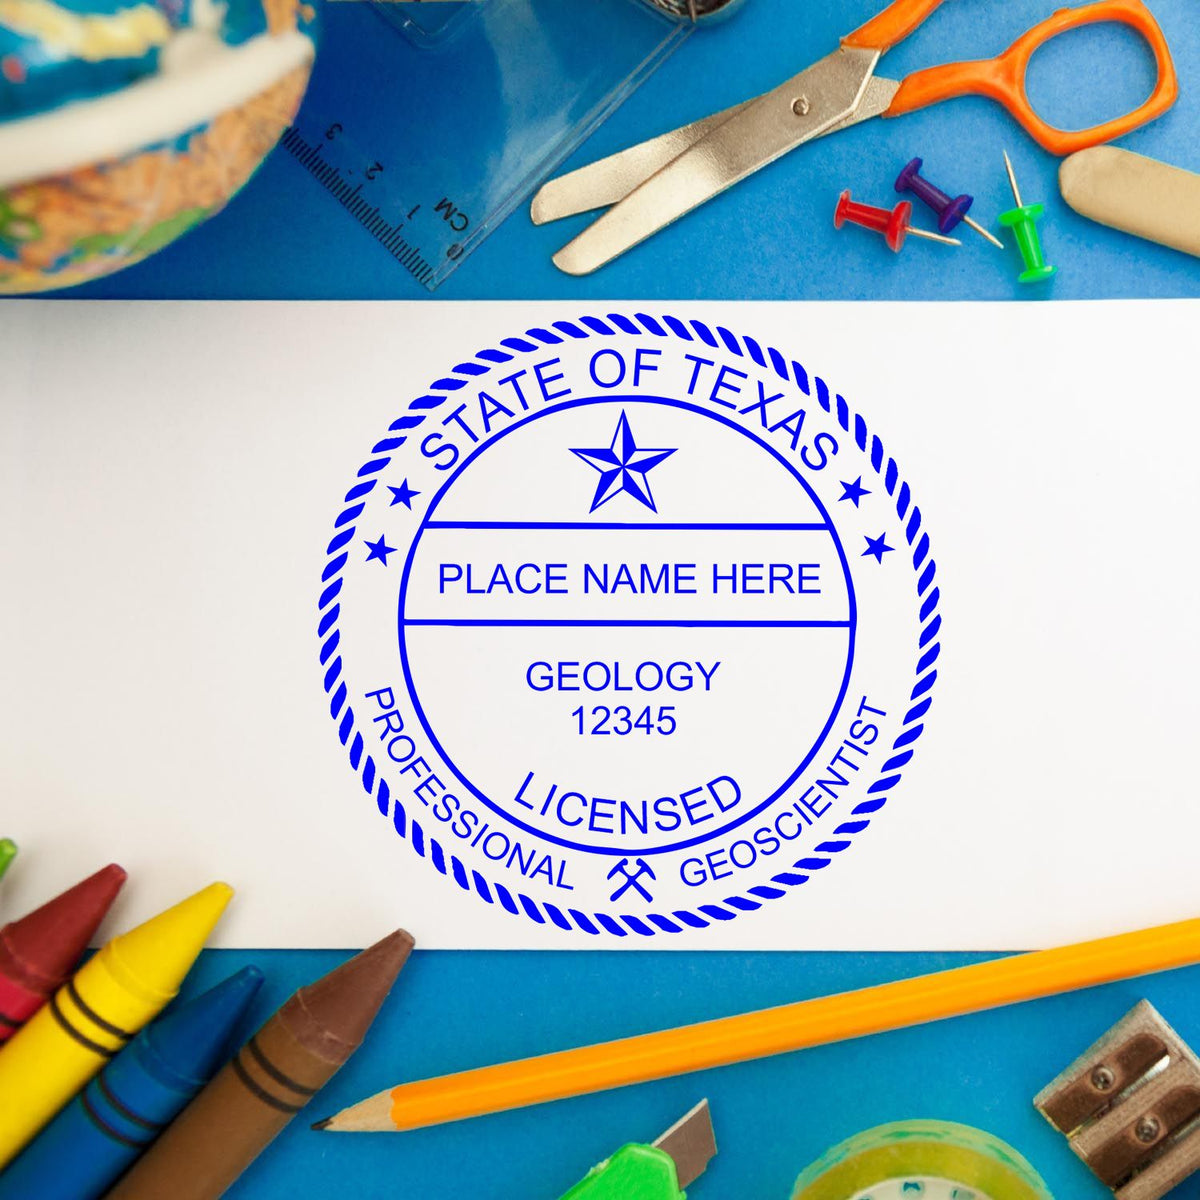 This paper is stamped with a sample imprint of the Self-Inking Texas Geologist Stamp, signifying its quality and reliability.